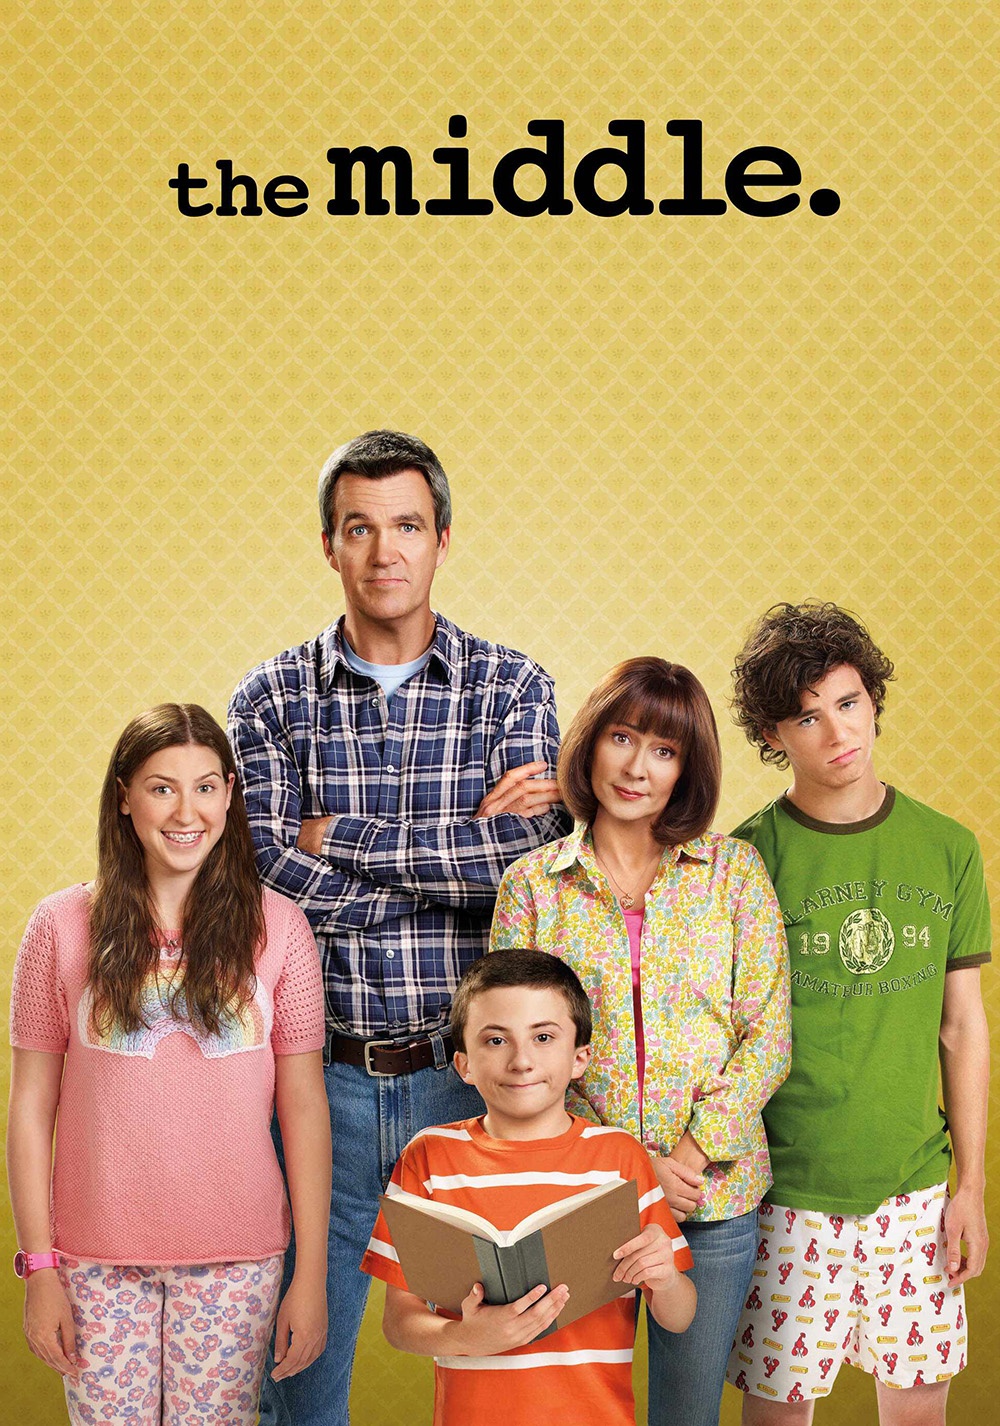 Why American Sitcom “The Middle” is One of the Best Family Comedies Ever 2